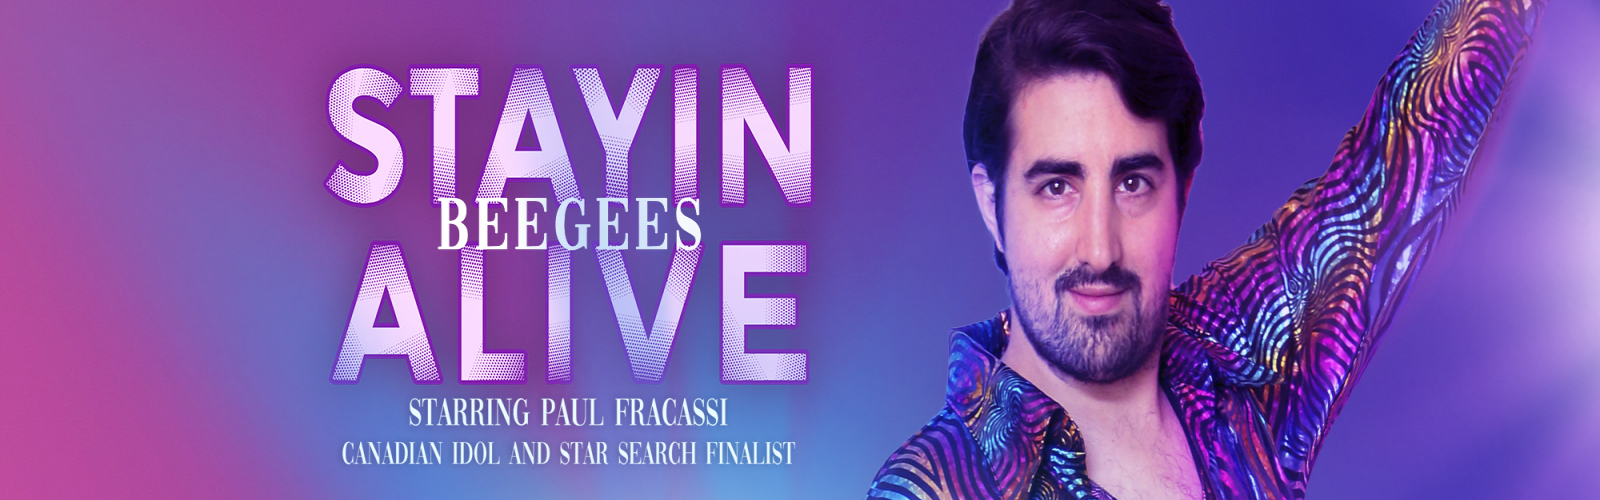 STAYIN ALIVE / BEEGEES, starring Paul Fracassi